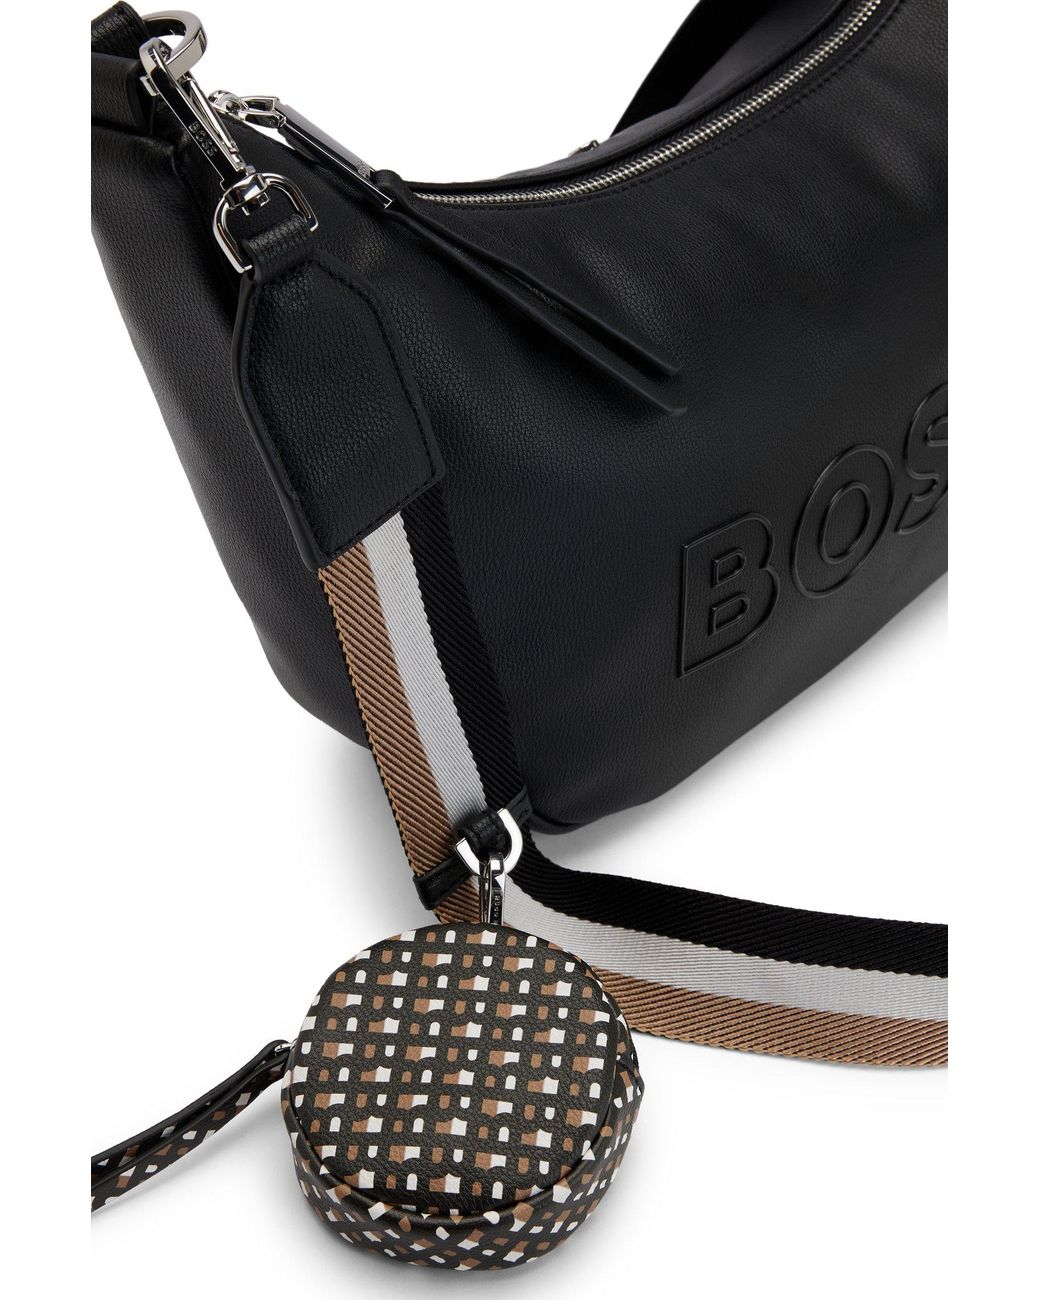 Hugo Boss Fashion Store Purse in Munich Germany Editorial Photo - Image of  consumer, backpack: 253152356